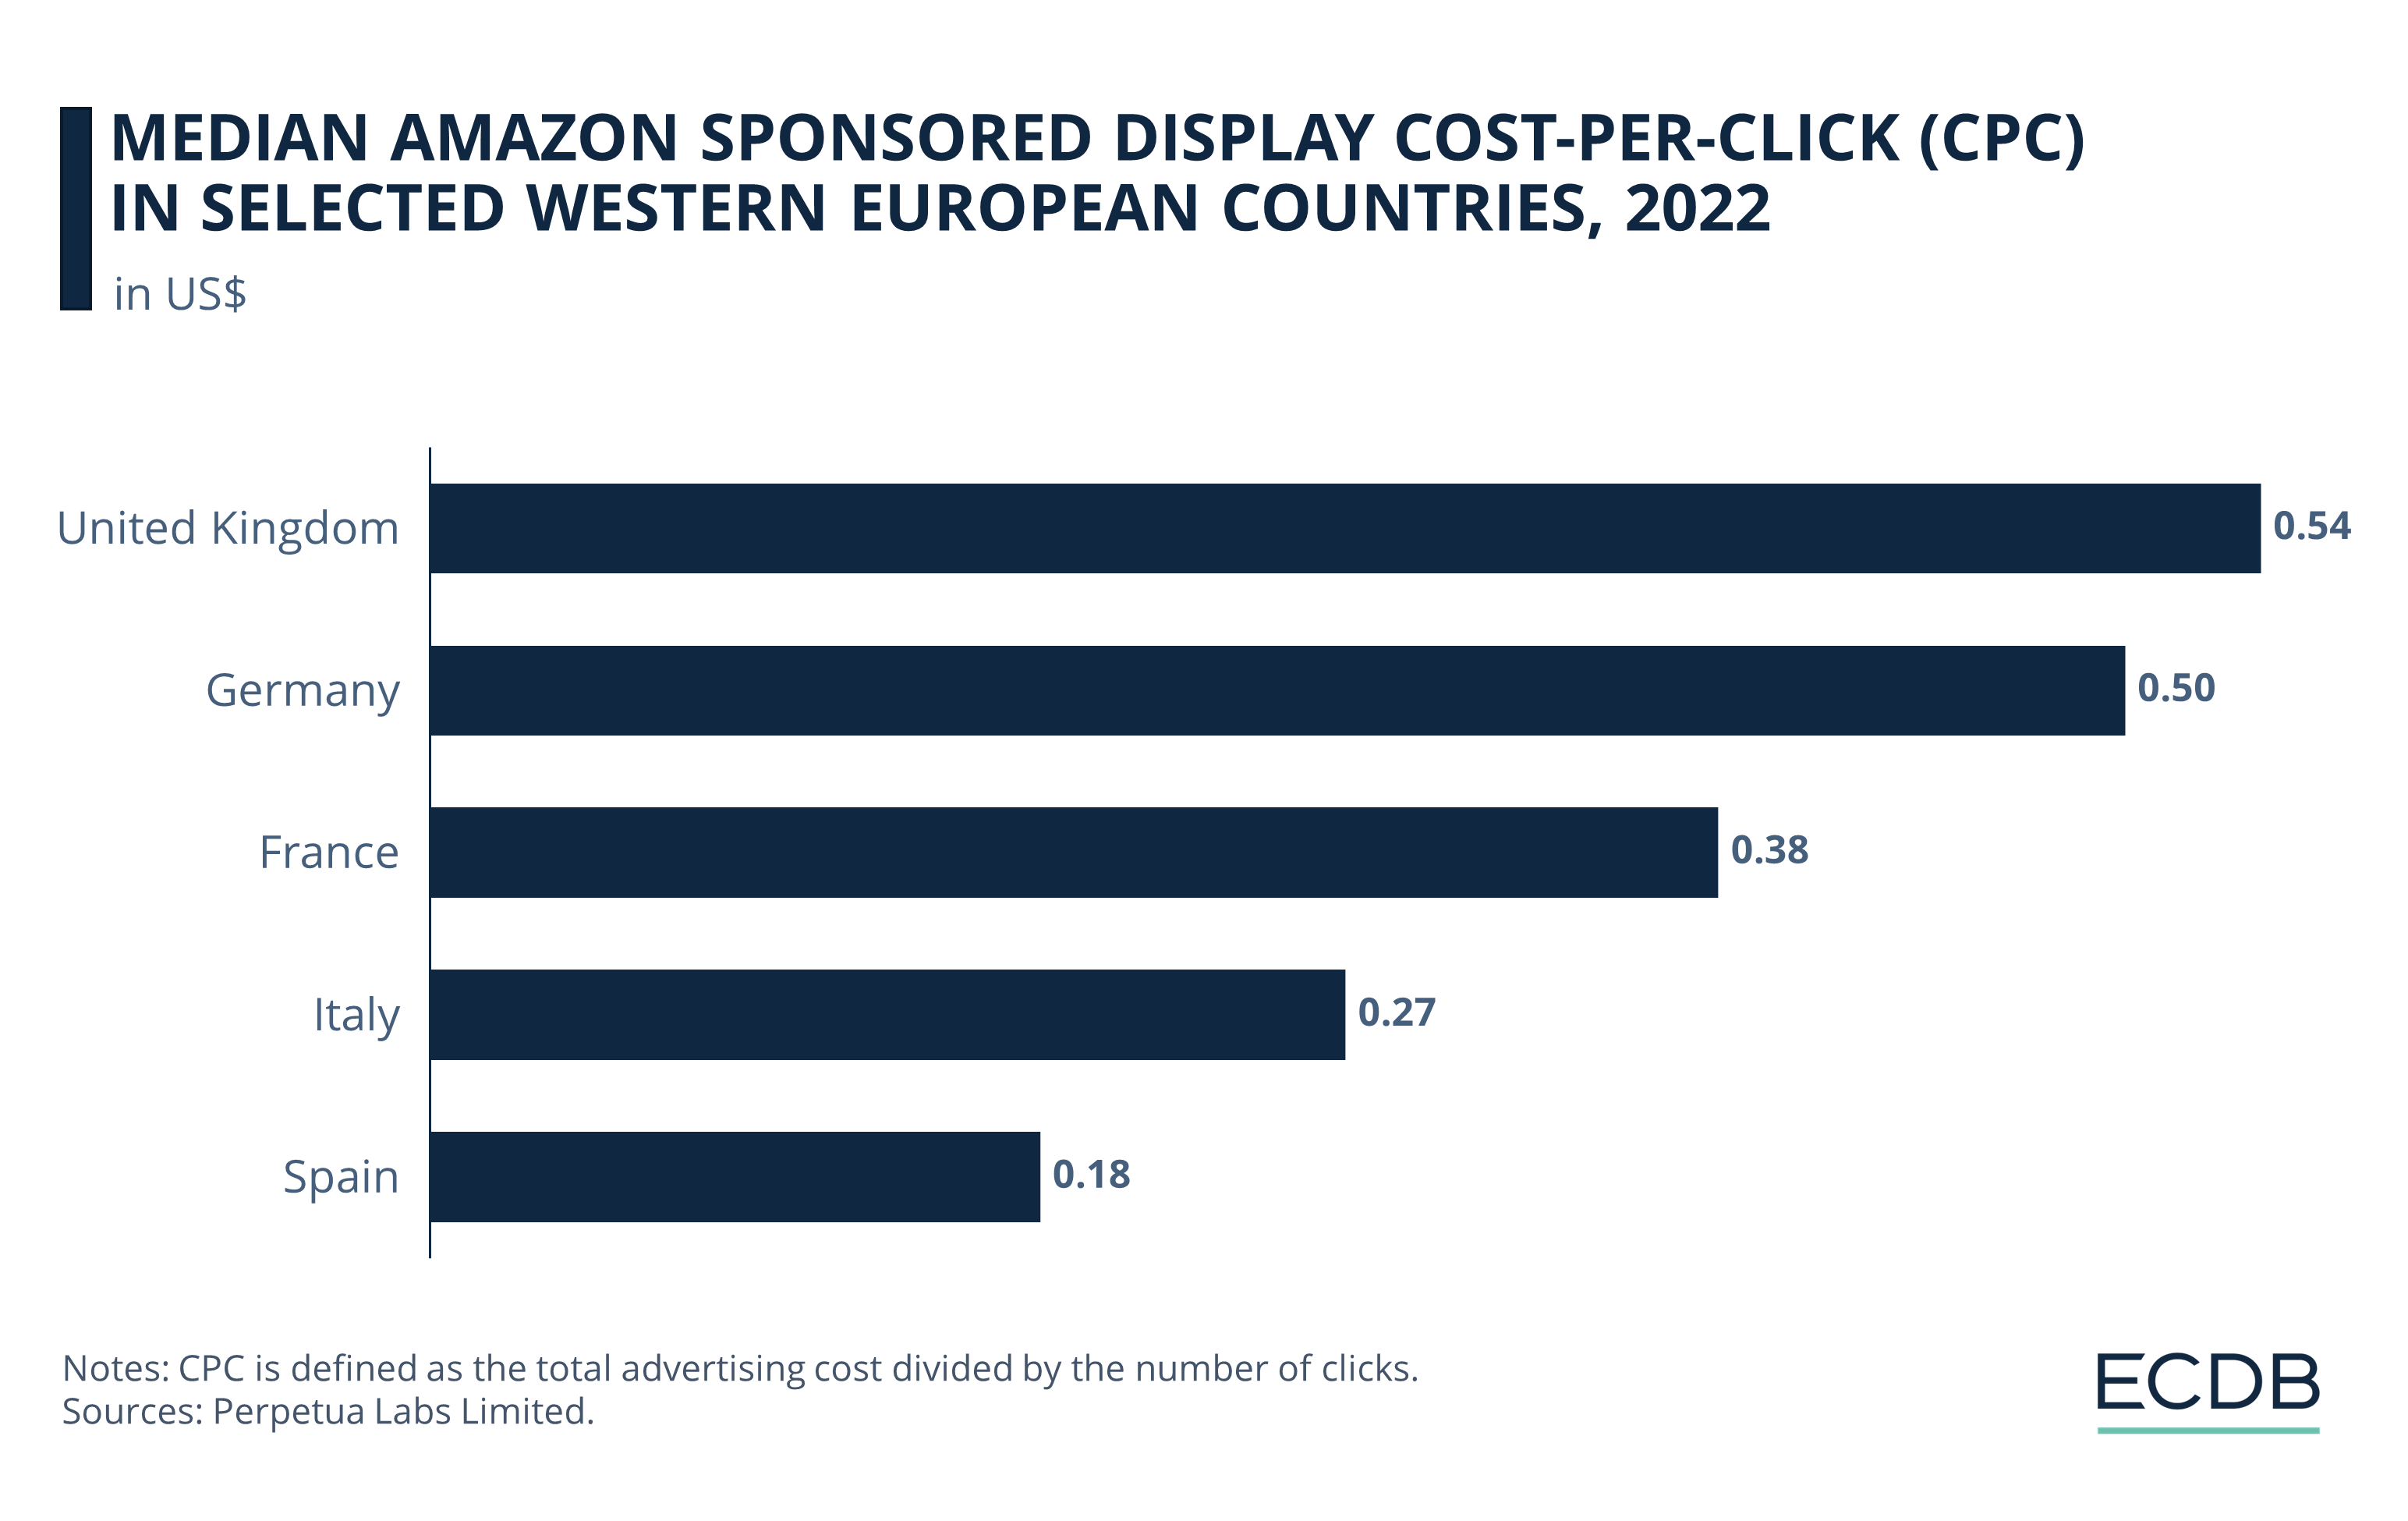 Amazon Median Sponsored Display CPC in Selected Western European Countries